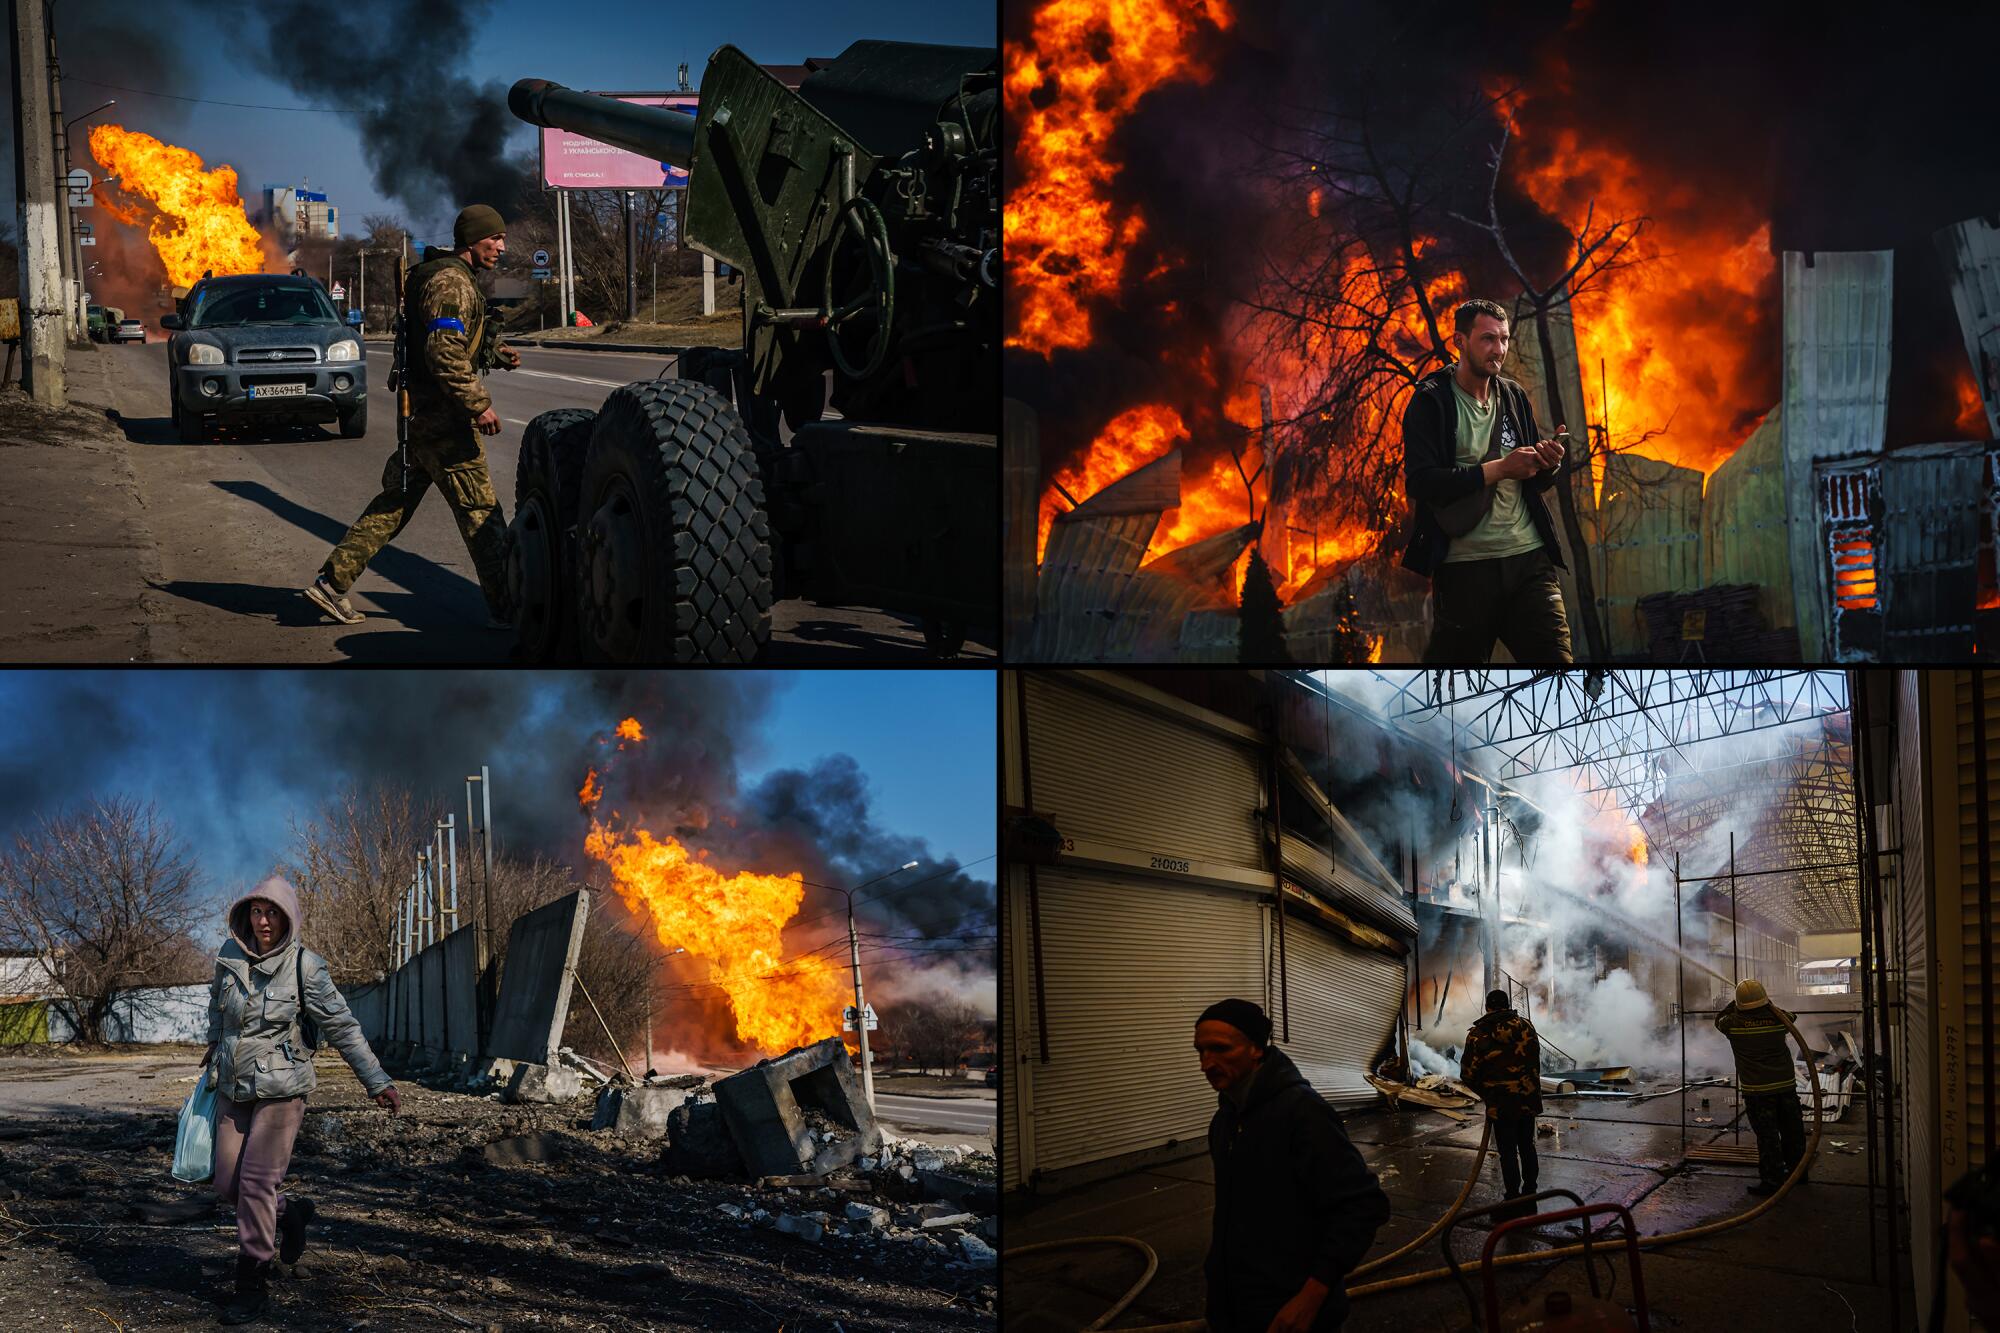 Four photos from Kharkiv showing soldiers, civilians and firefighters walking away or towards burning buildings.